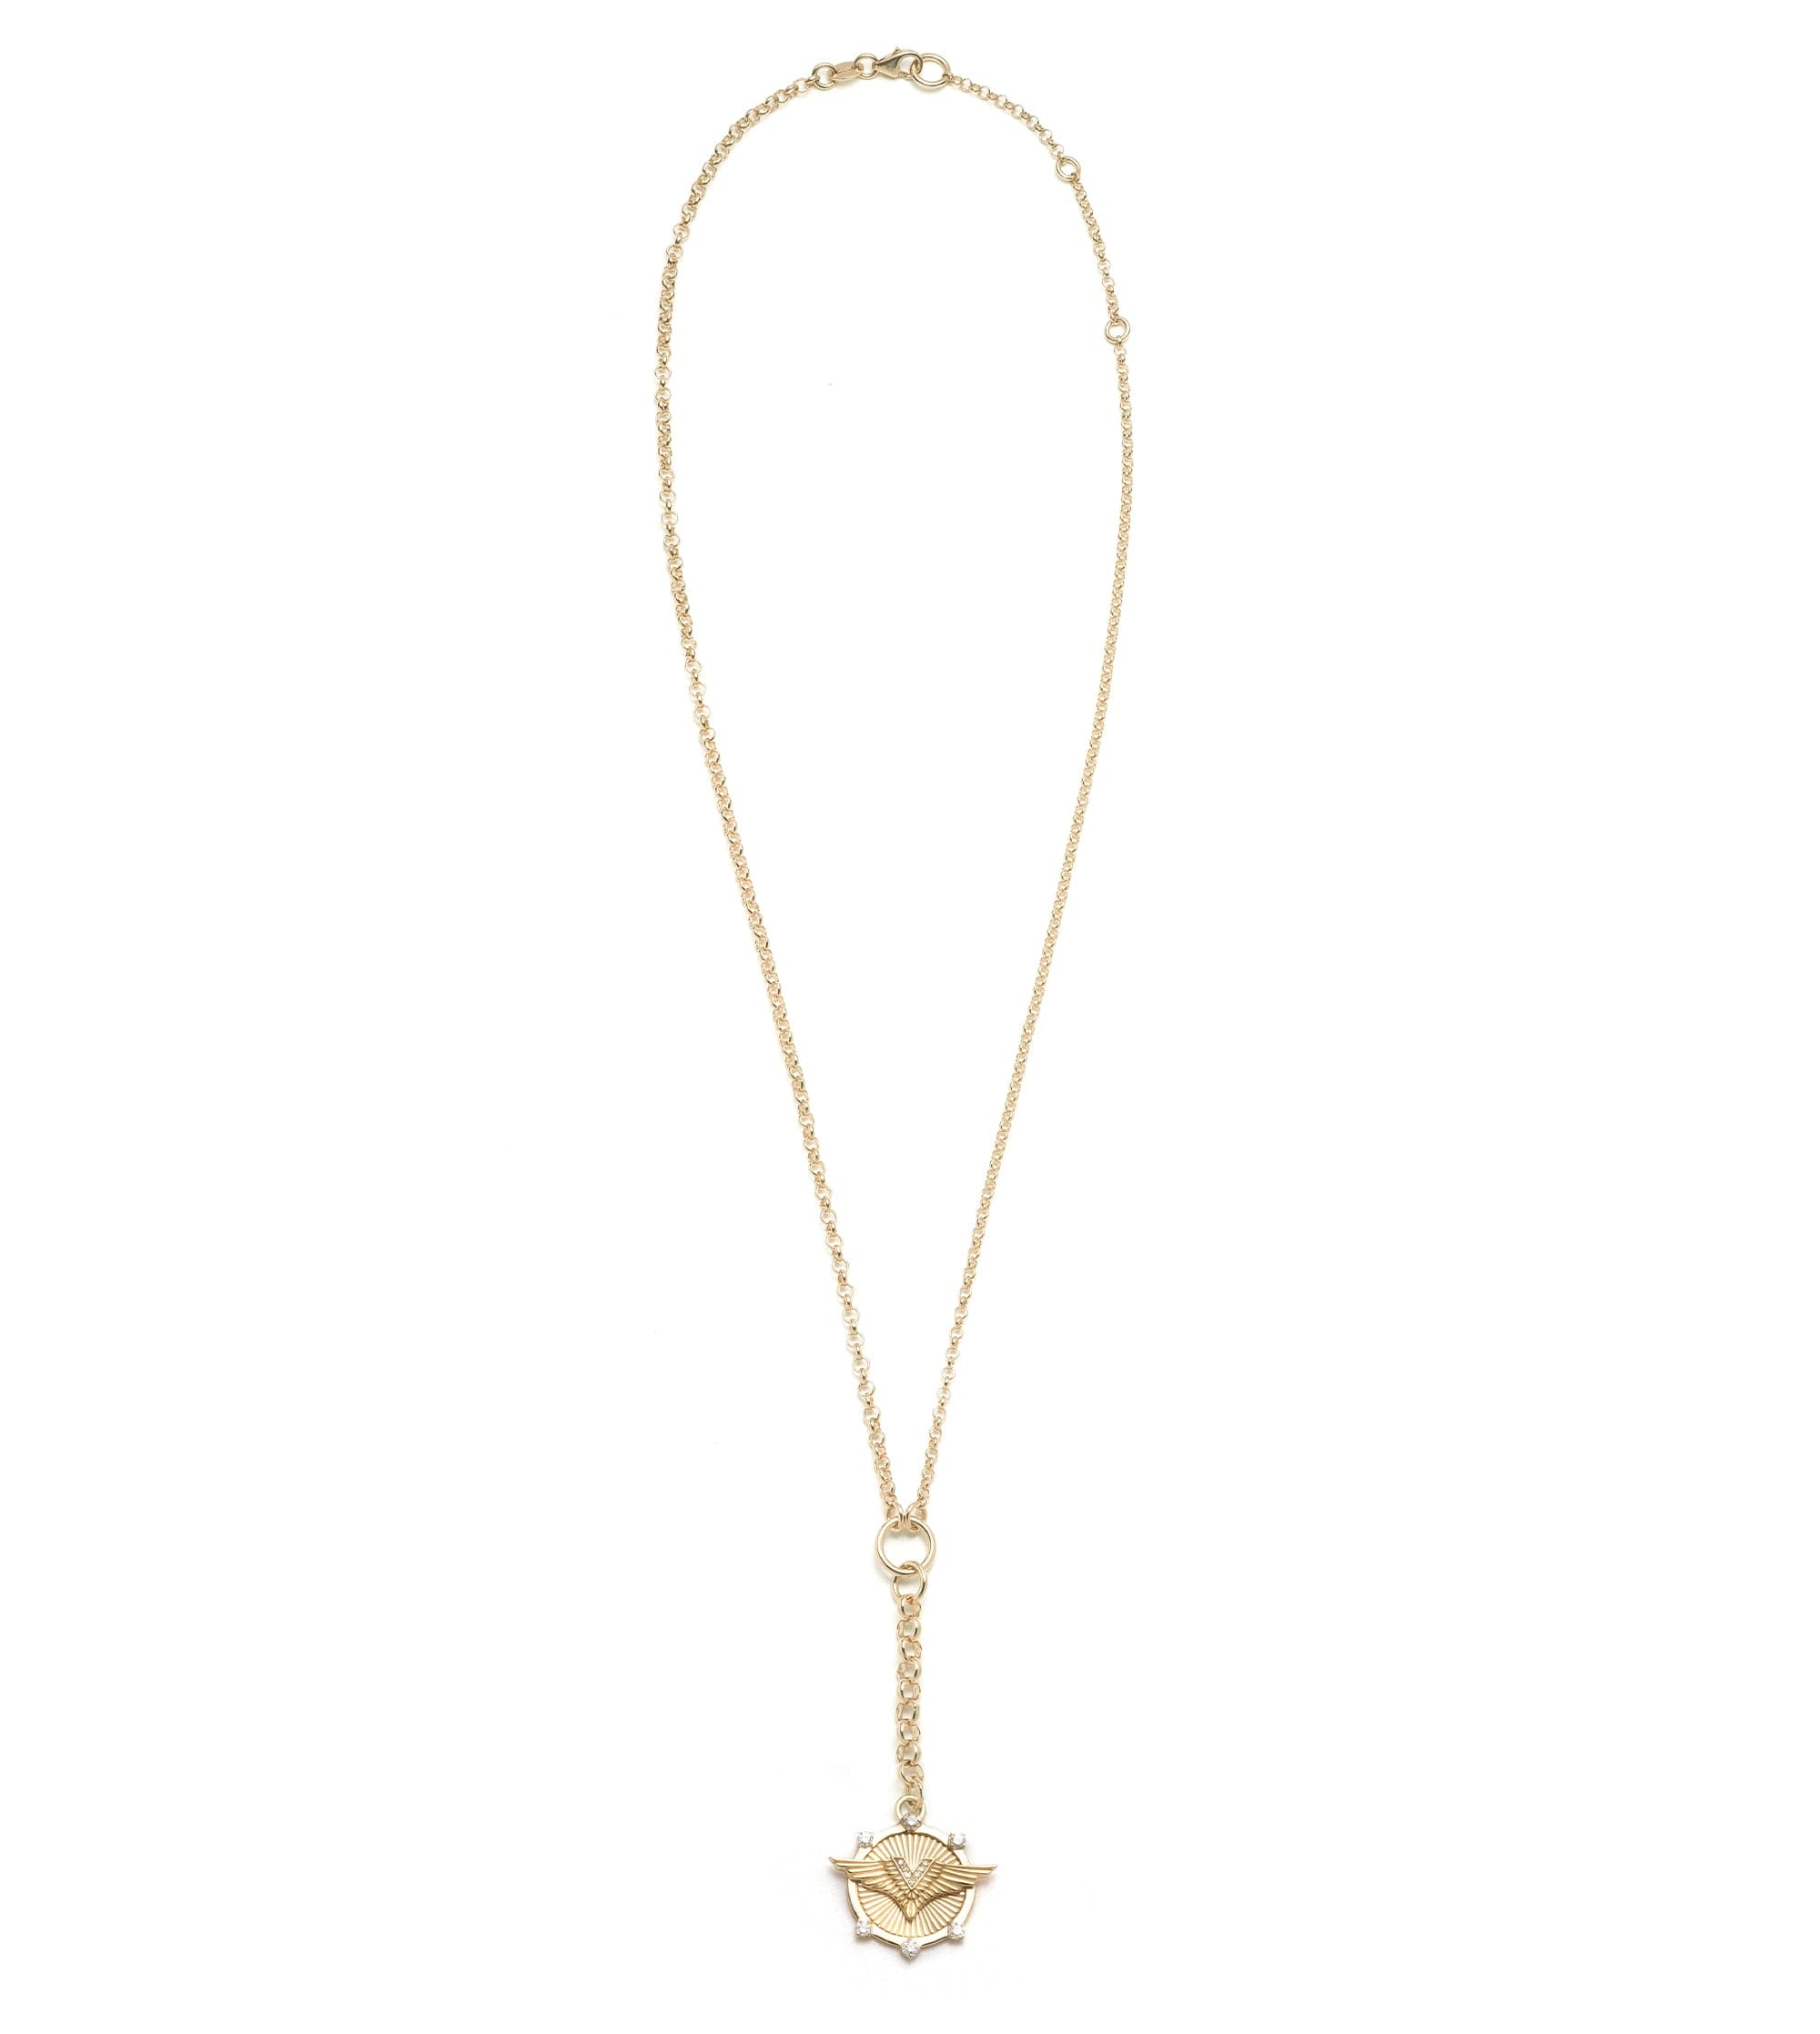 Passion : Small Mixed Belcher Extension Chain Necklace